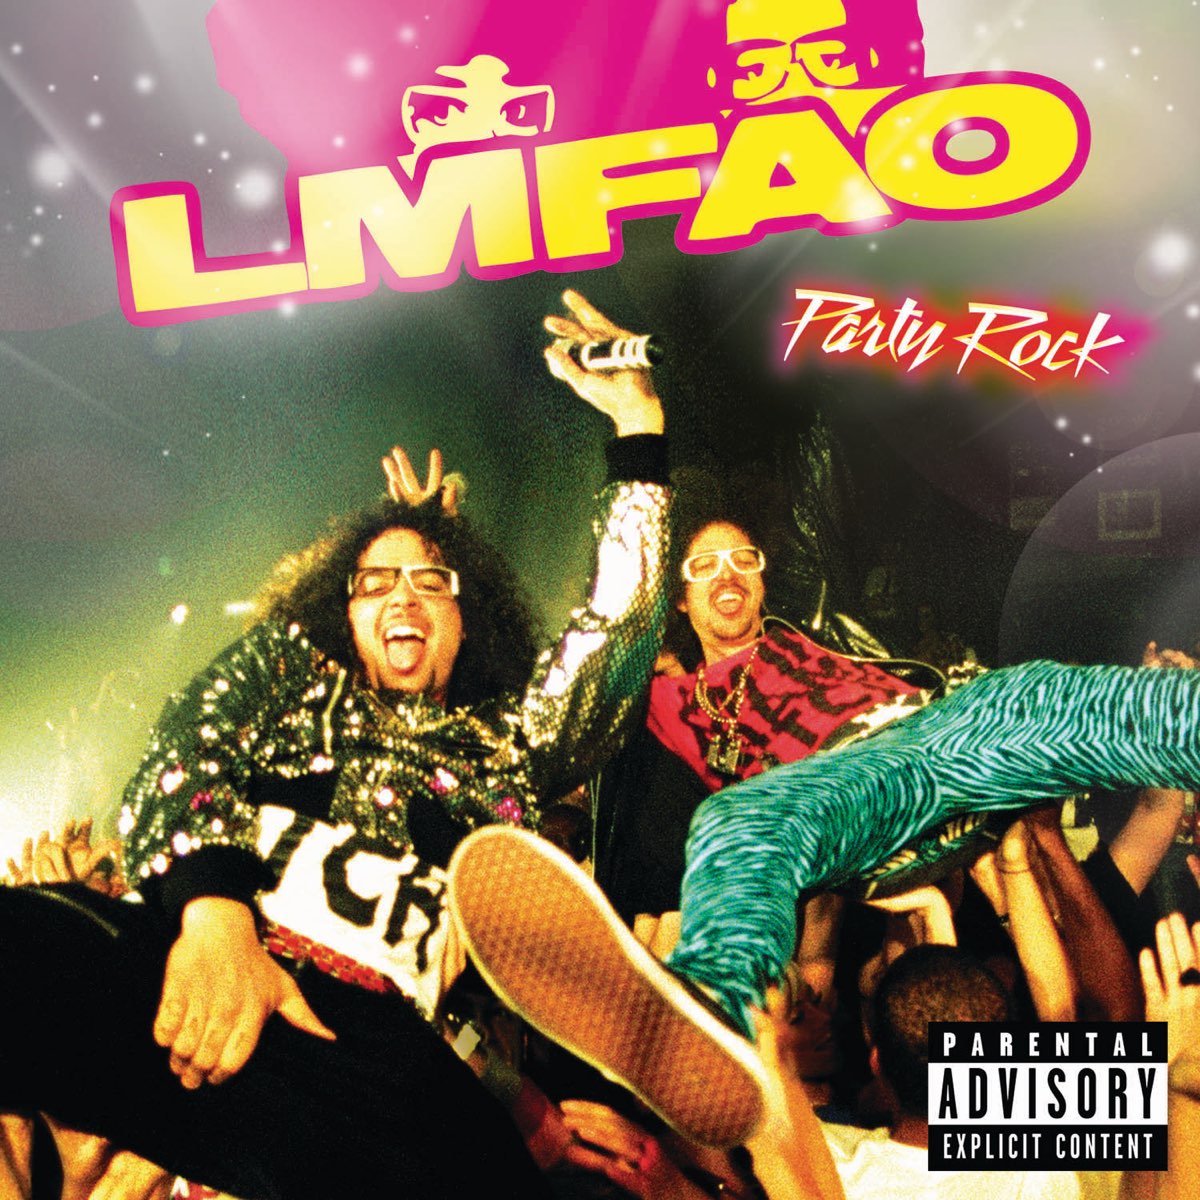 Party Rock by LMFAO on Apple Music